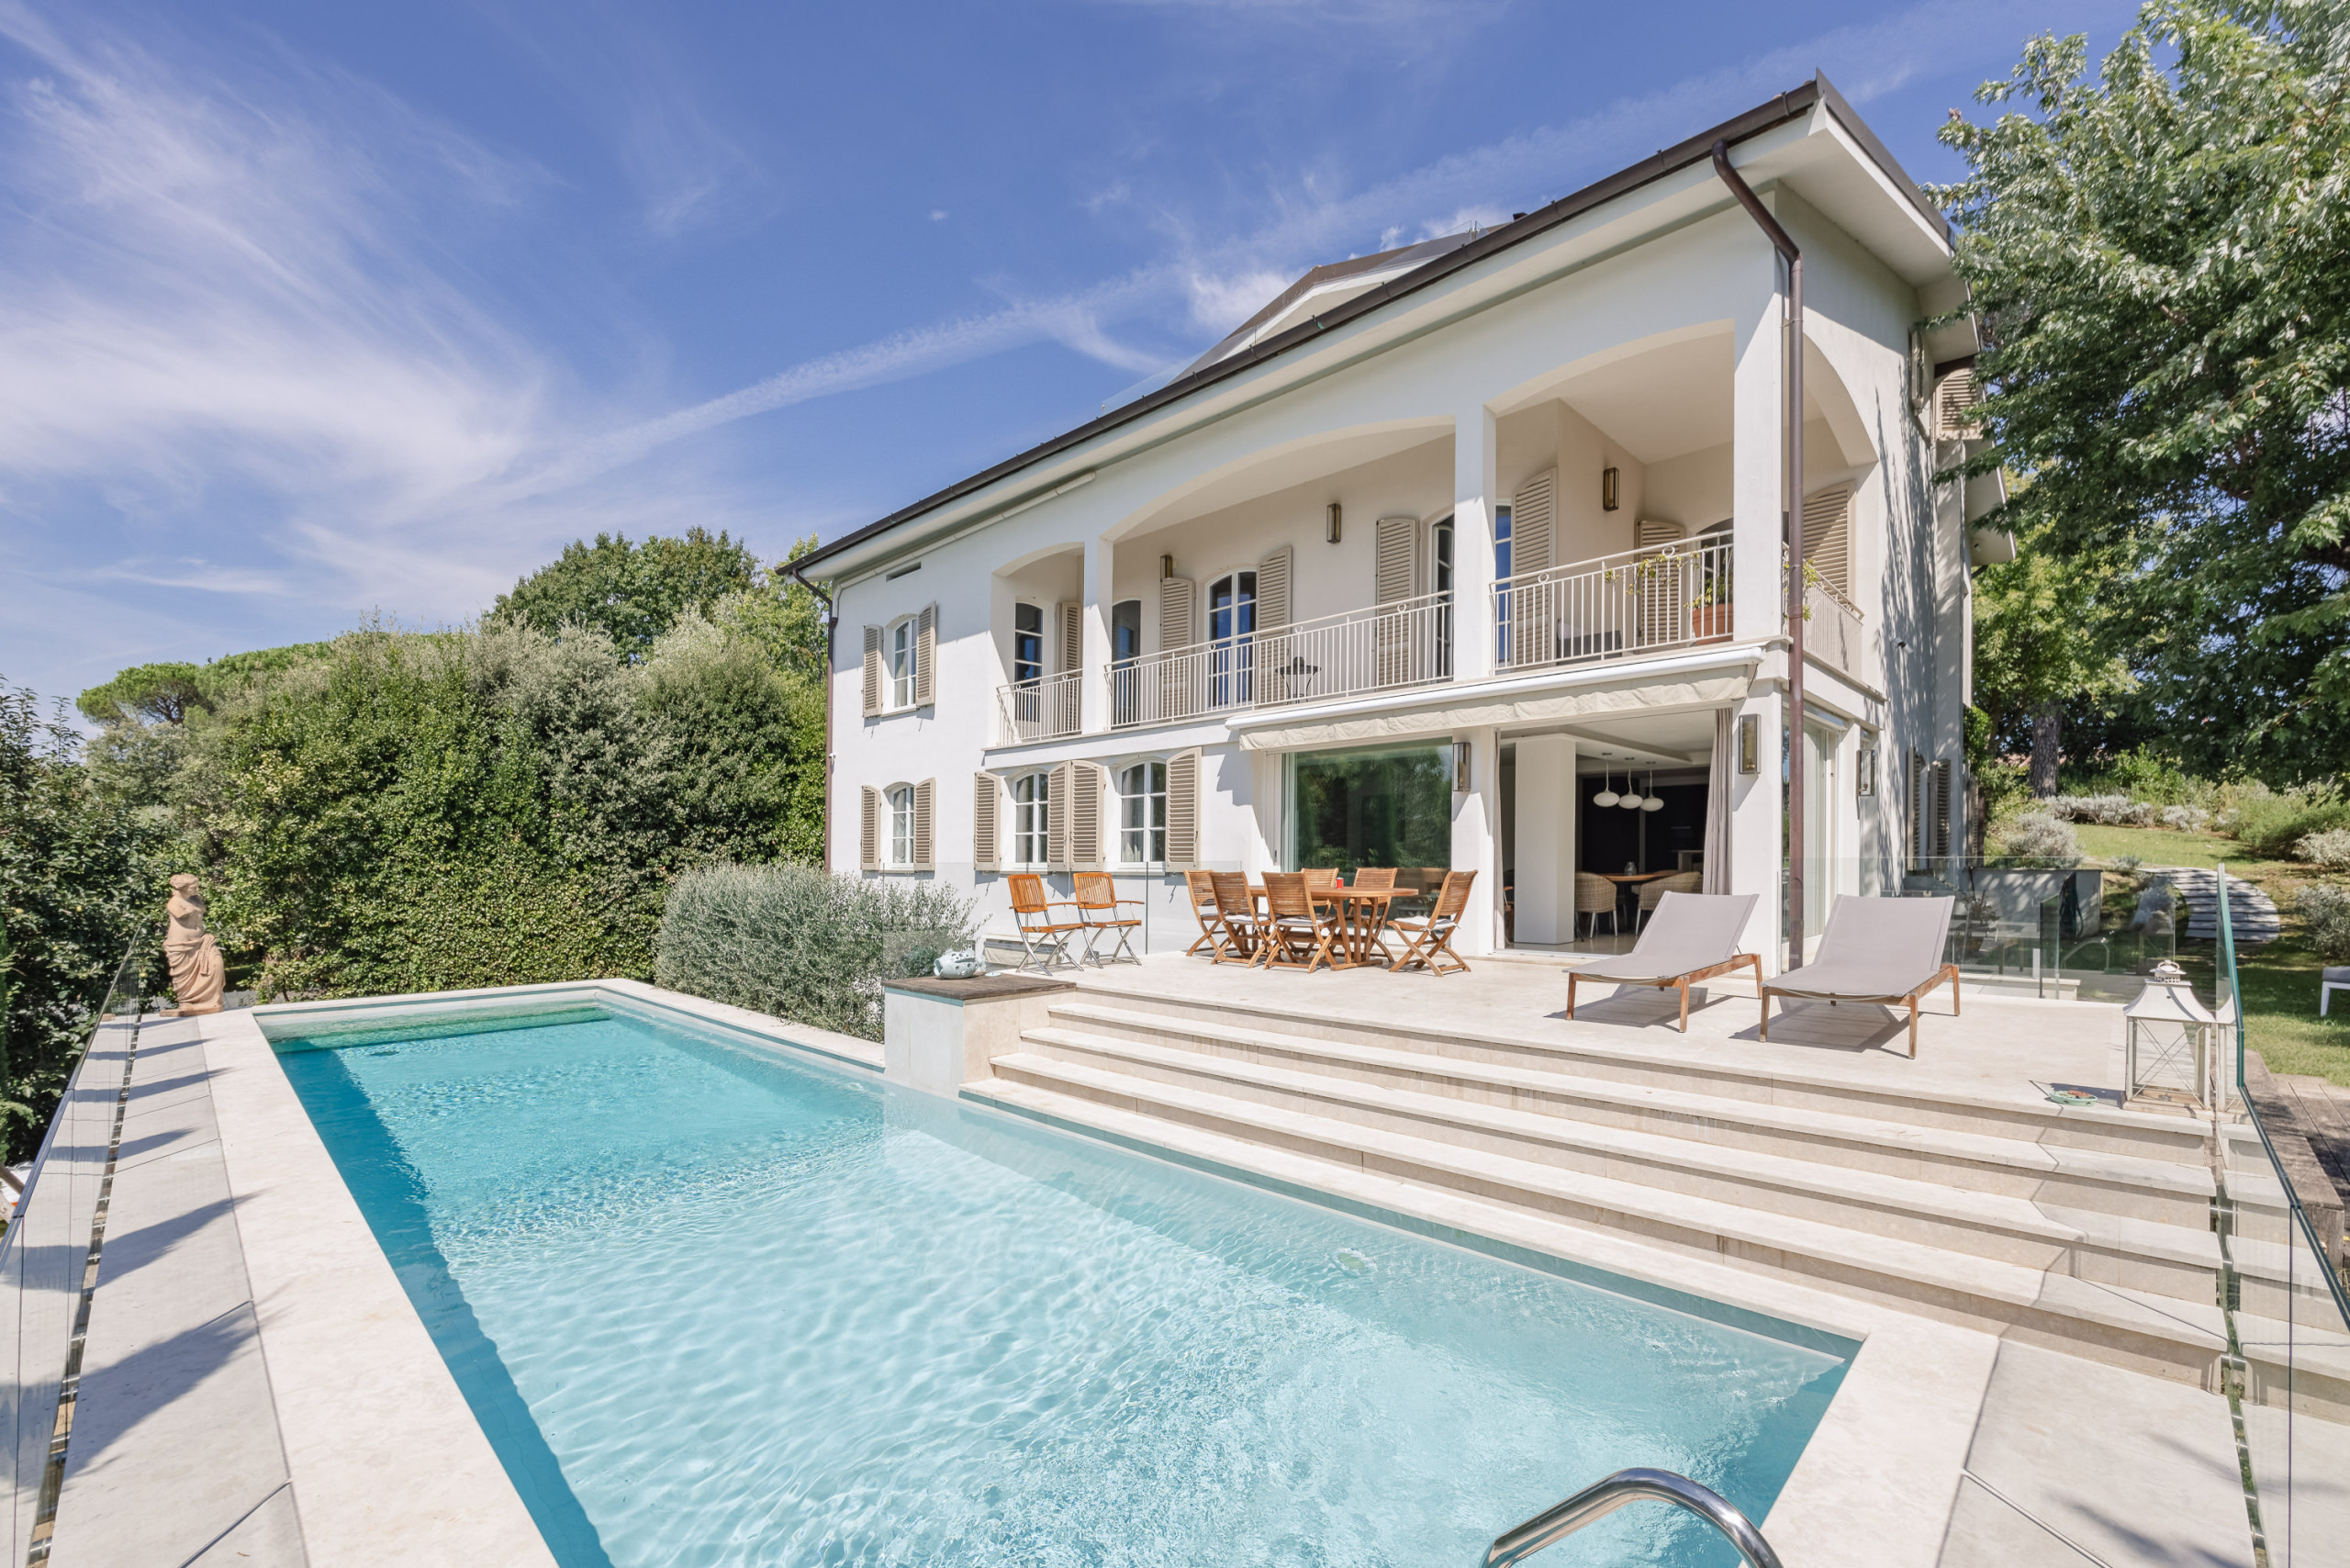 Villa in Lucca - Villa Ivona Modern Luxury Classic Villa with Private Pool and panoramic views in 3 kms from Lucca Walls